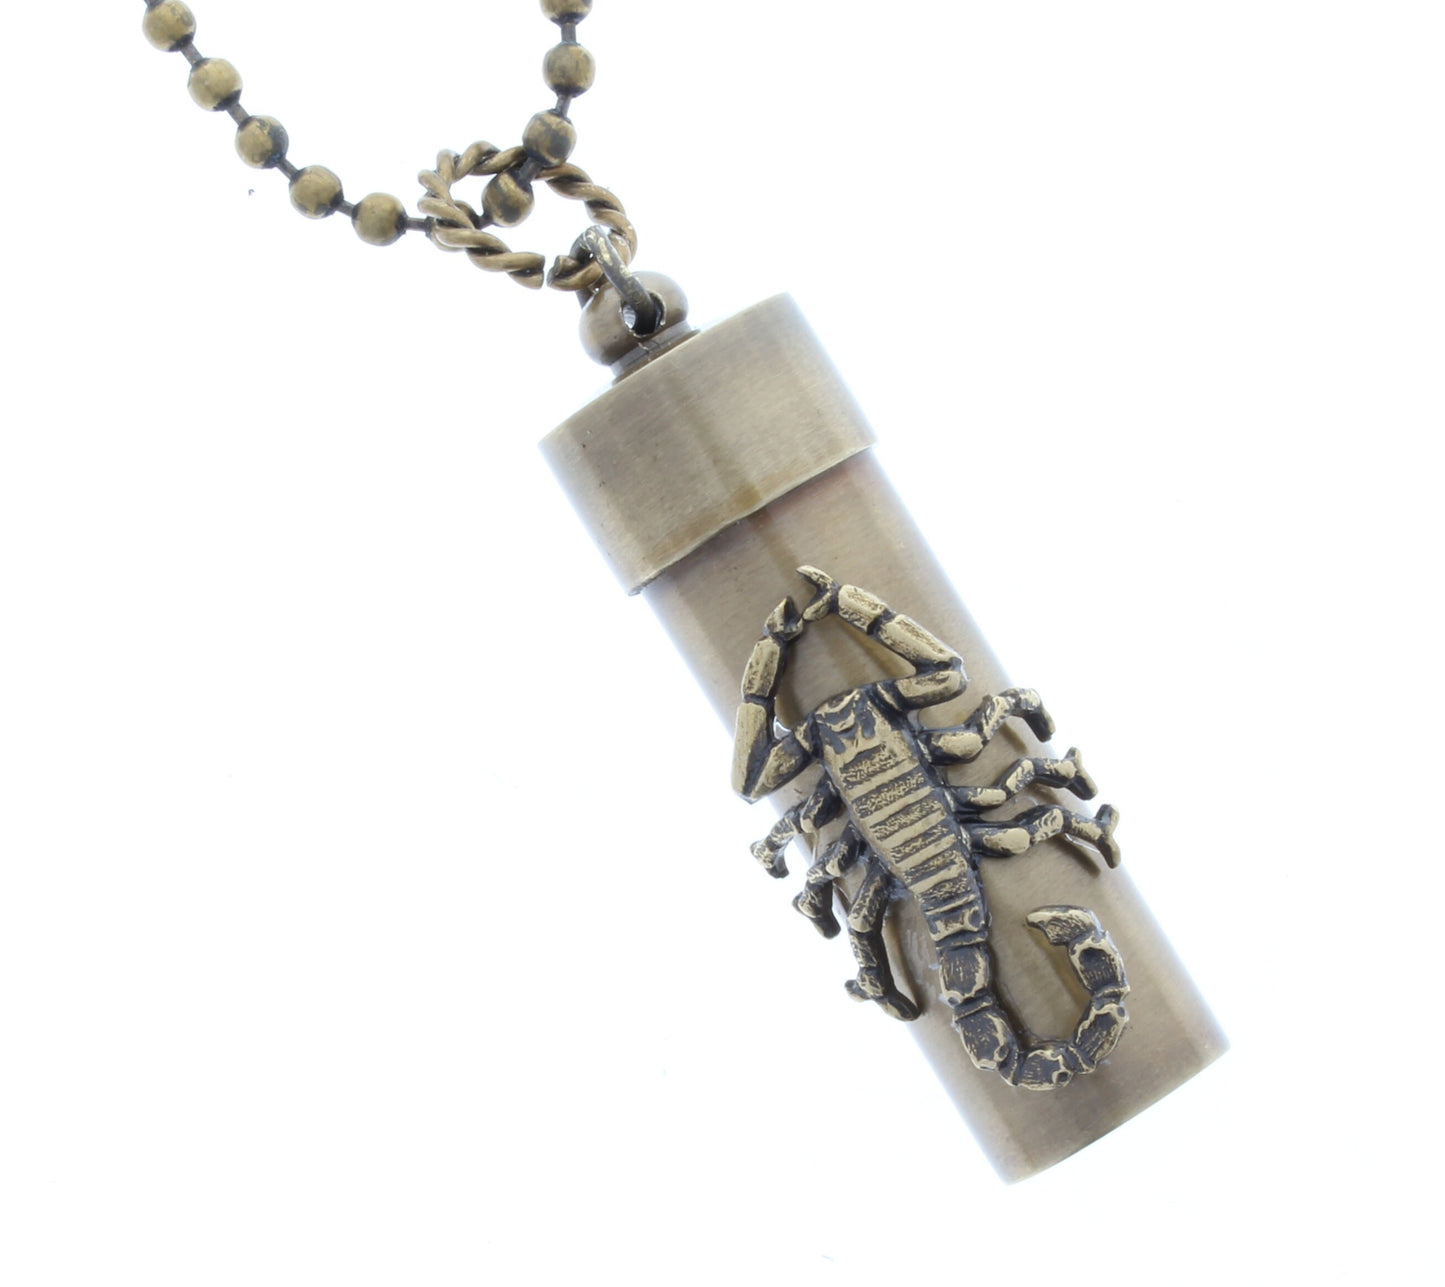 Scorpion Brass Canister Pill Box Pendant Necklace, 2"L, twist off cap, 18" or 24" ball chain, burnished brass, Made in USA, Each